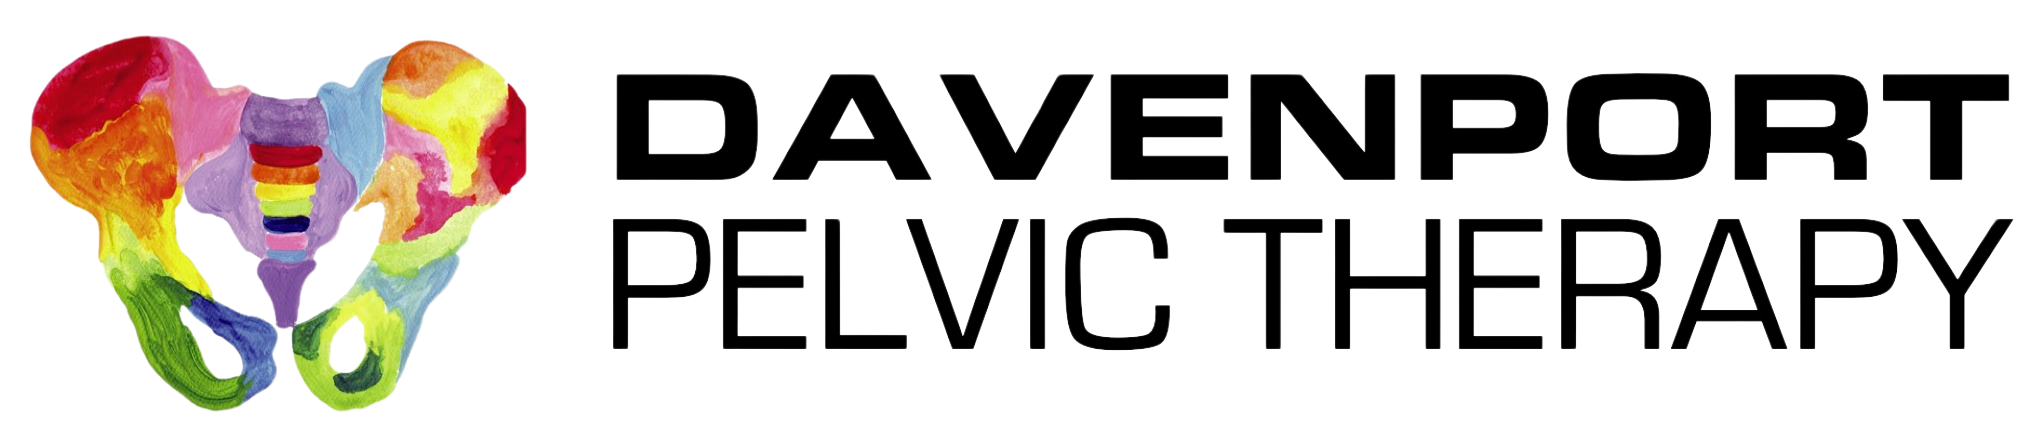 Logo for Davenport Pelvic Therapy, featuring a colorful illustration of a pelvic bone and bold black text to the right as the main header.